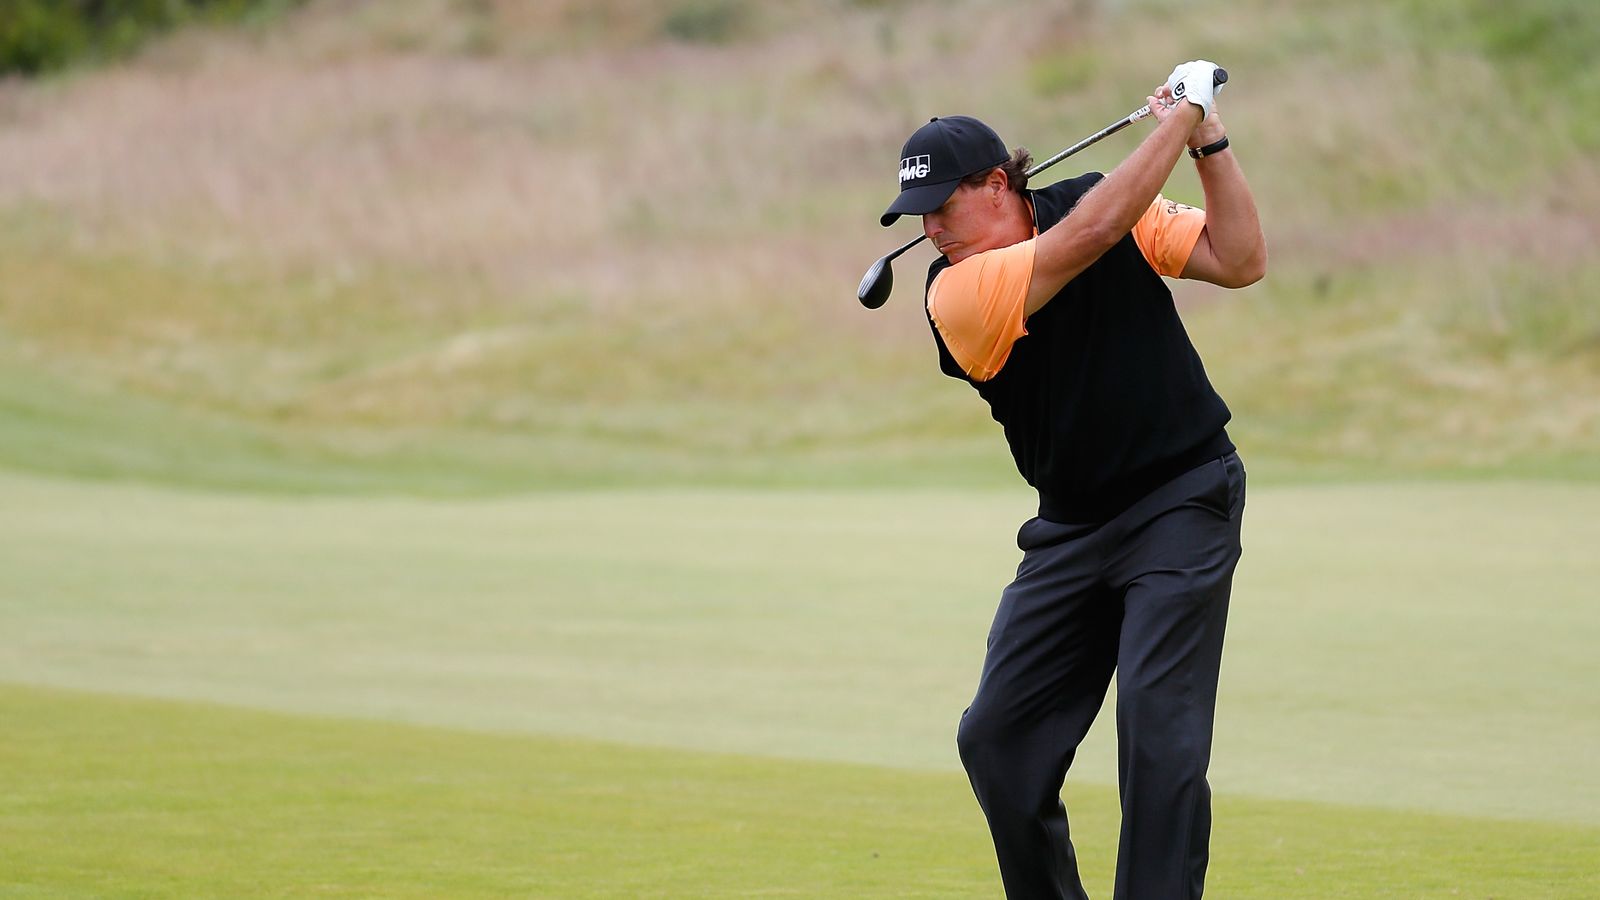 Phil Mickelson hoping for form improvement ahead of The Open | Golf News |  Sky Sports